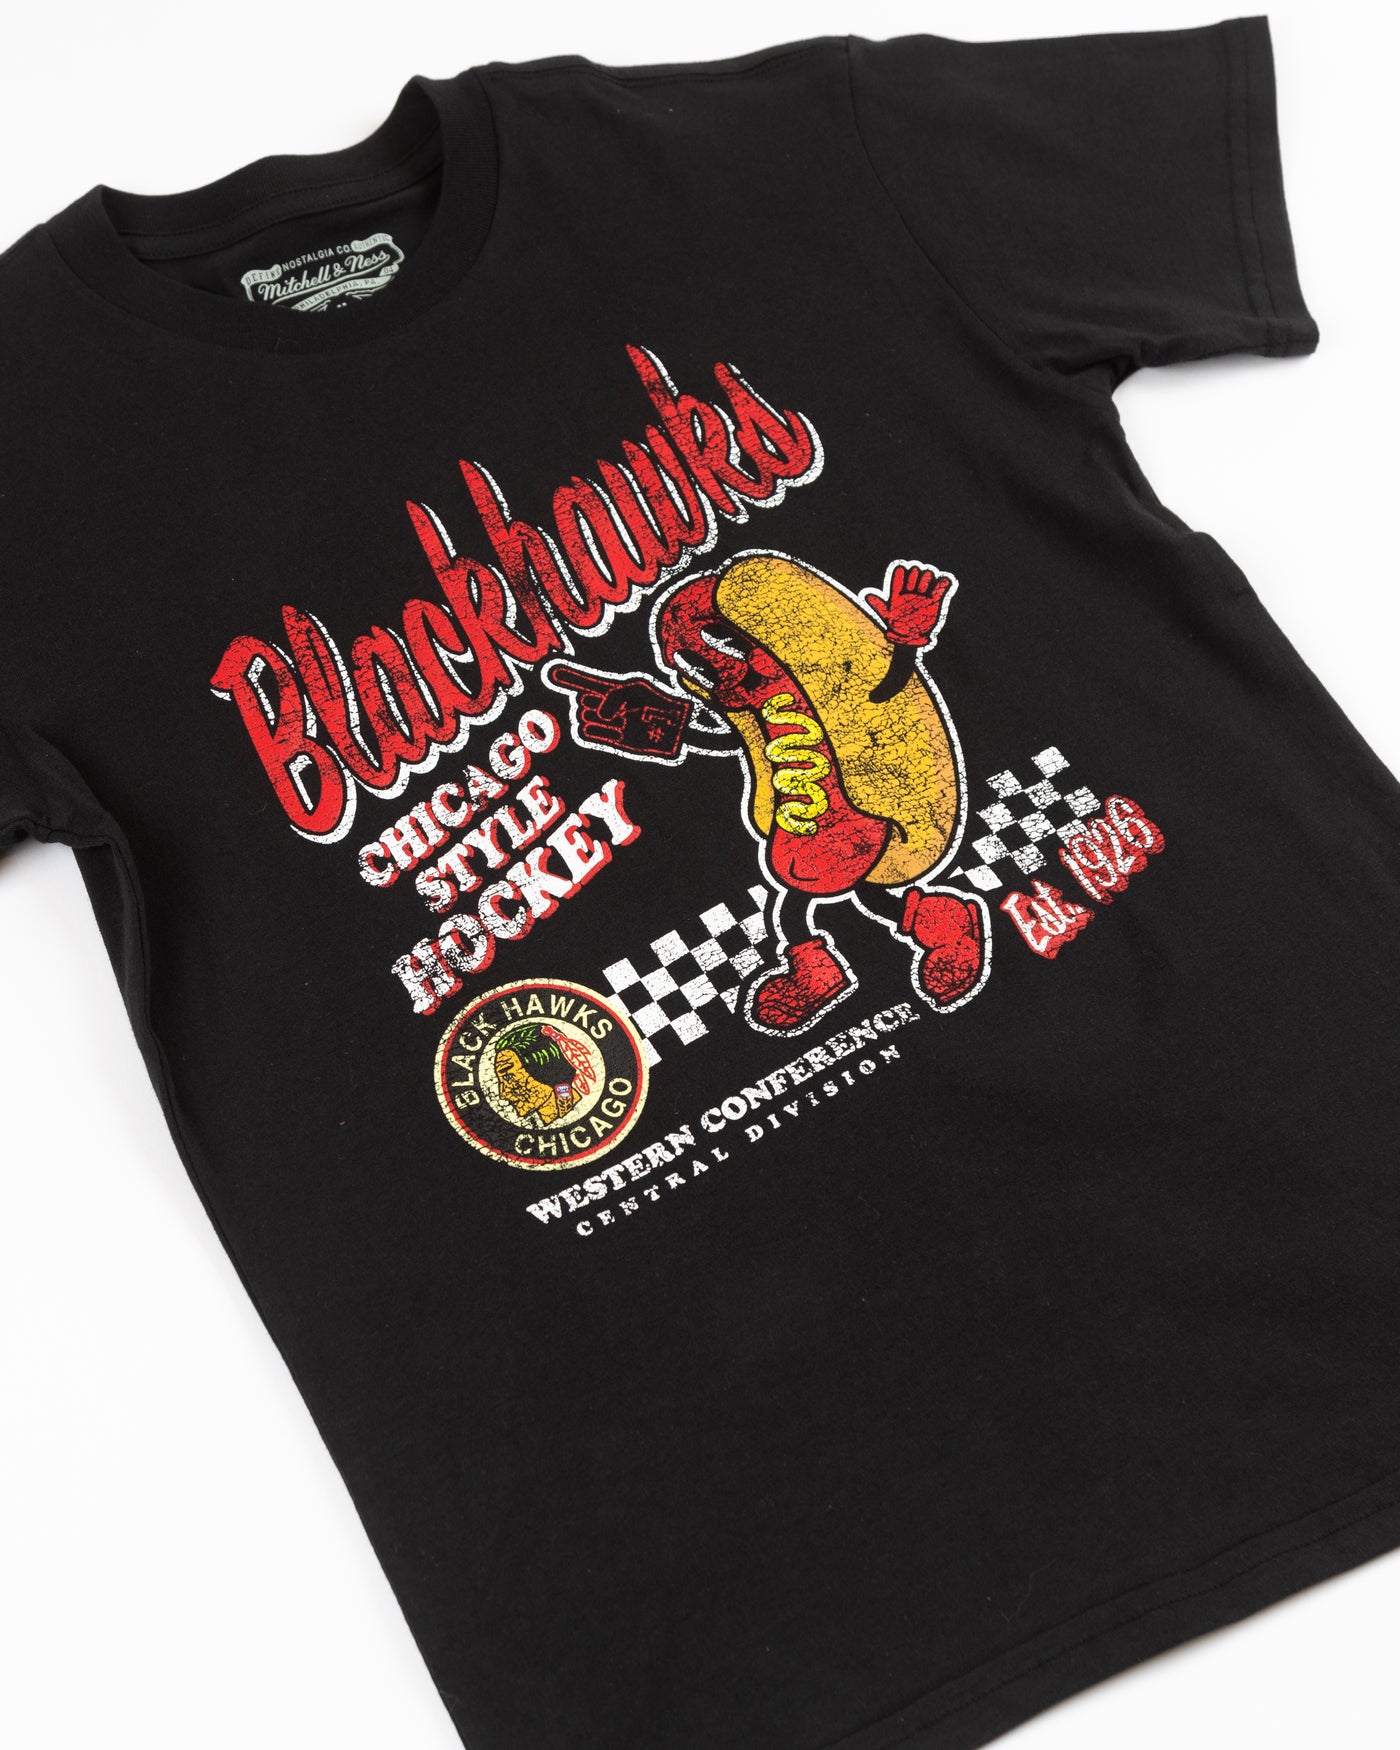 black youth size Mitchell & Ness tee with vintage Chicago Blackhawks logo and animated hot dog graphic across chest - alt detail lay flat